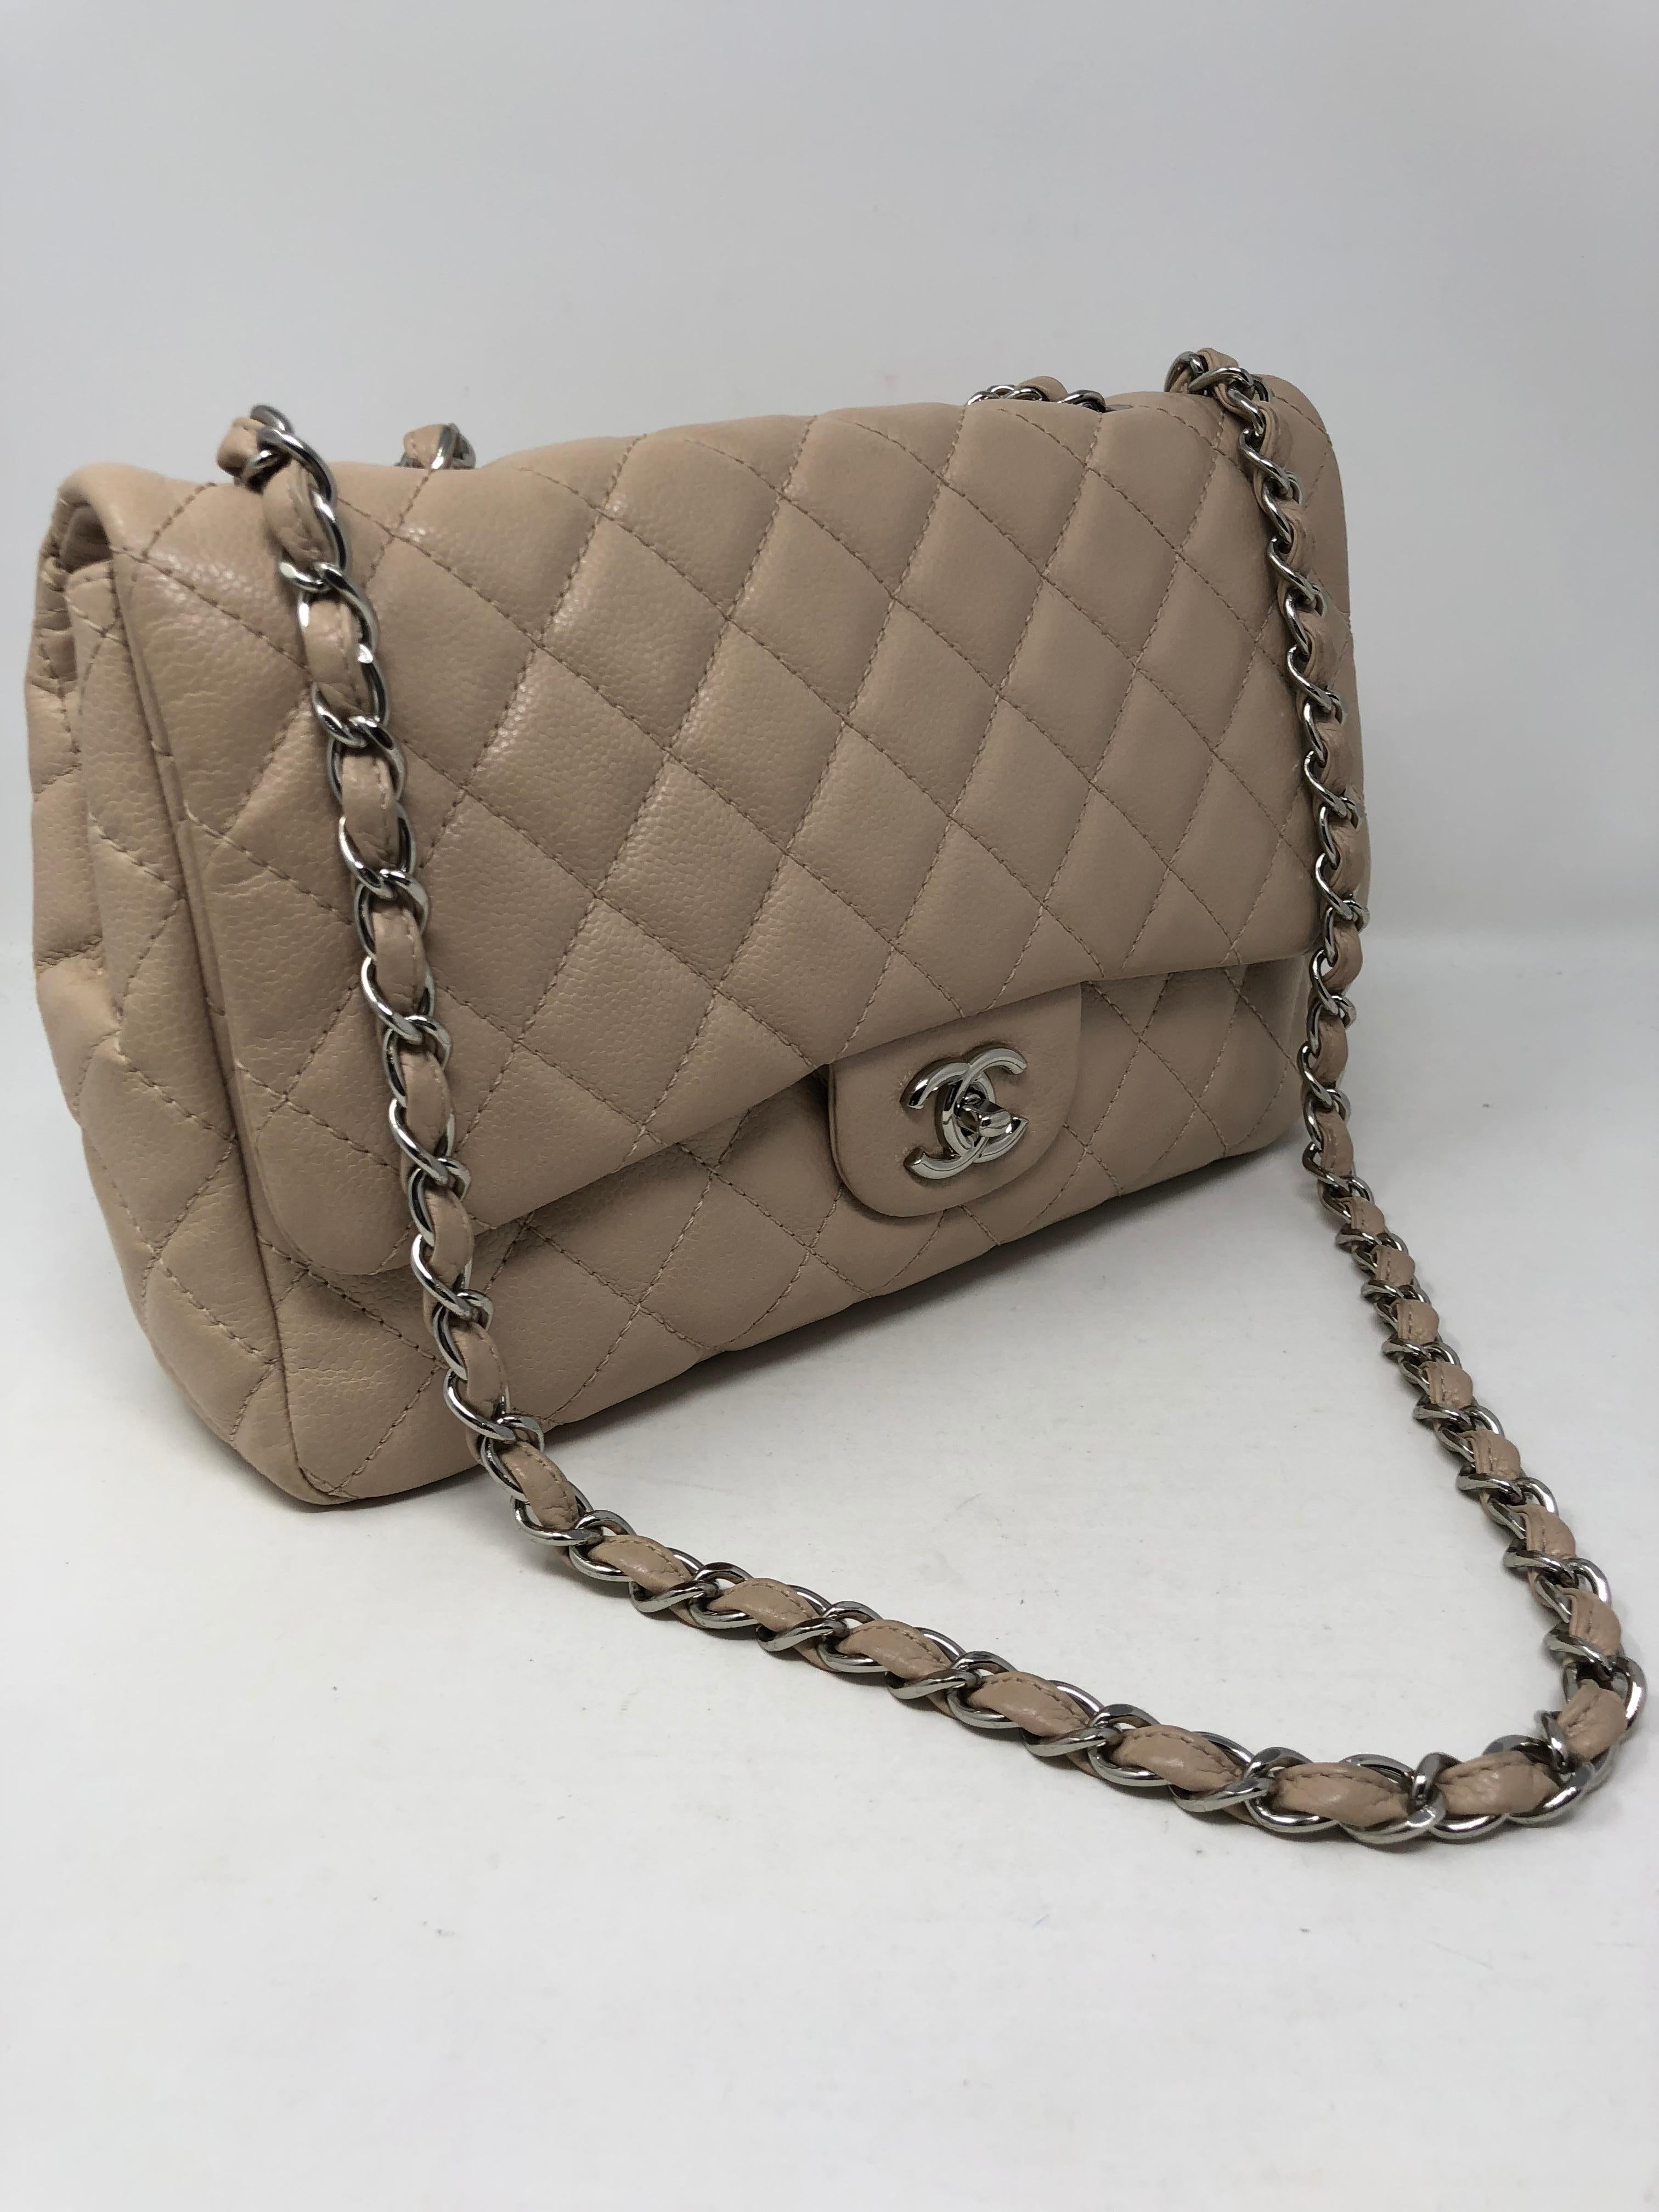 Chanel Jumbo Caviar Single Flap in Cream color. Durable caviar leather with silver hardware. Can be worn doubled or as a crossbody bag. Good condition. Neutral color for all seasons. Comes with authenticity card and dust cover. Guaranteed authentic. 